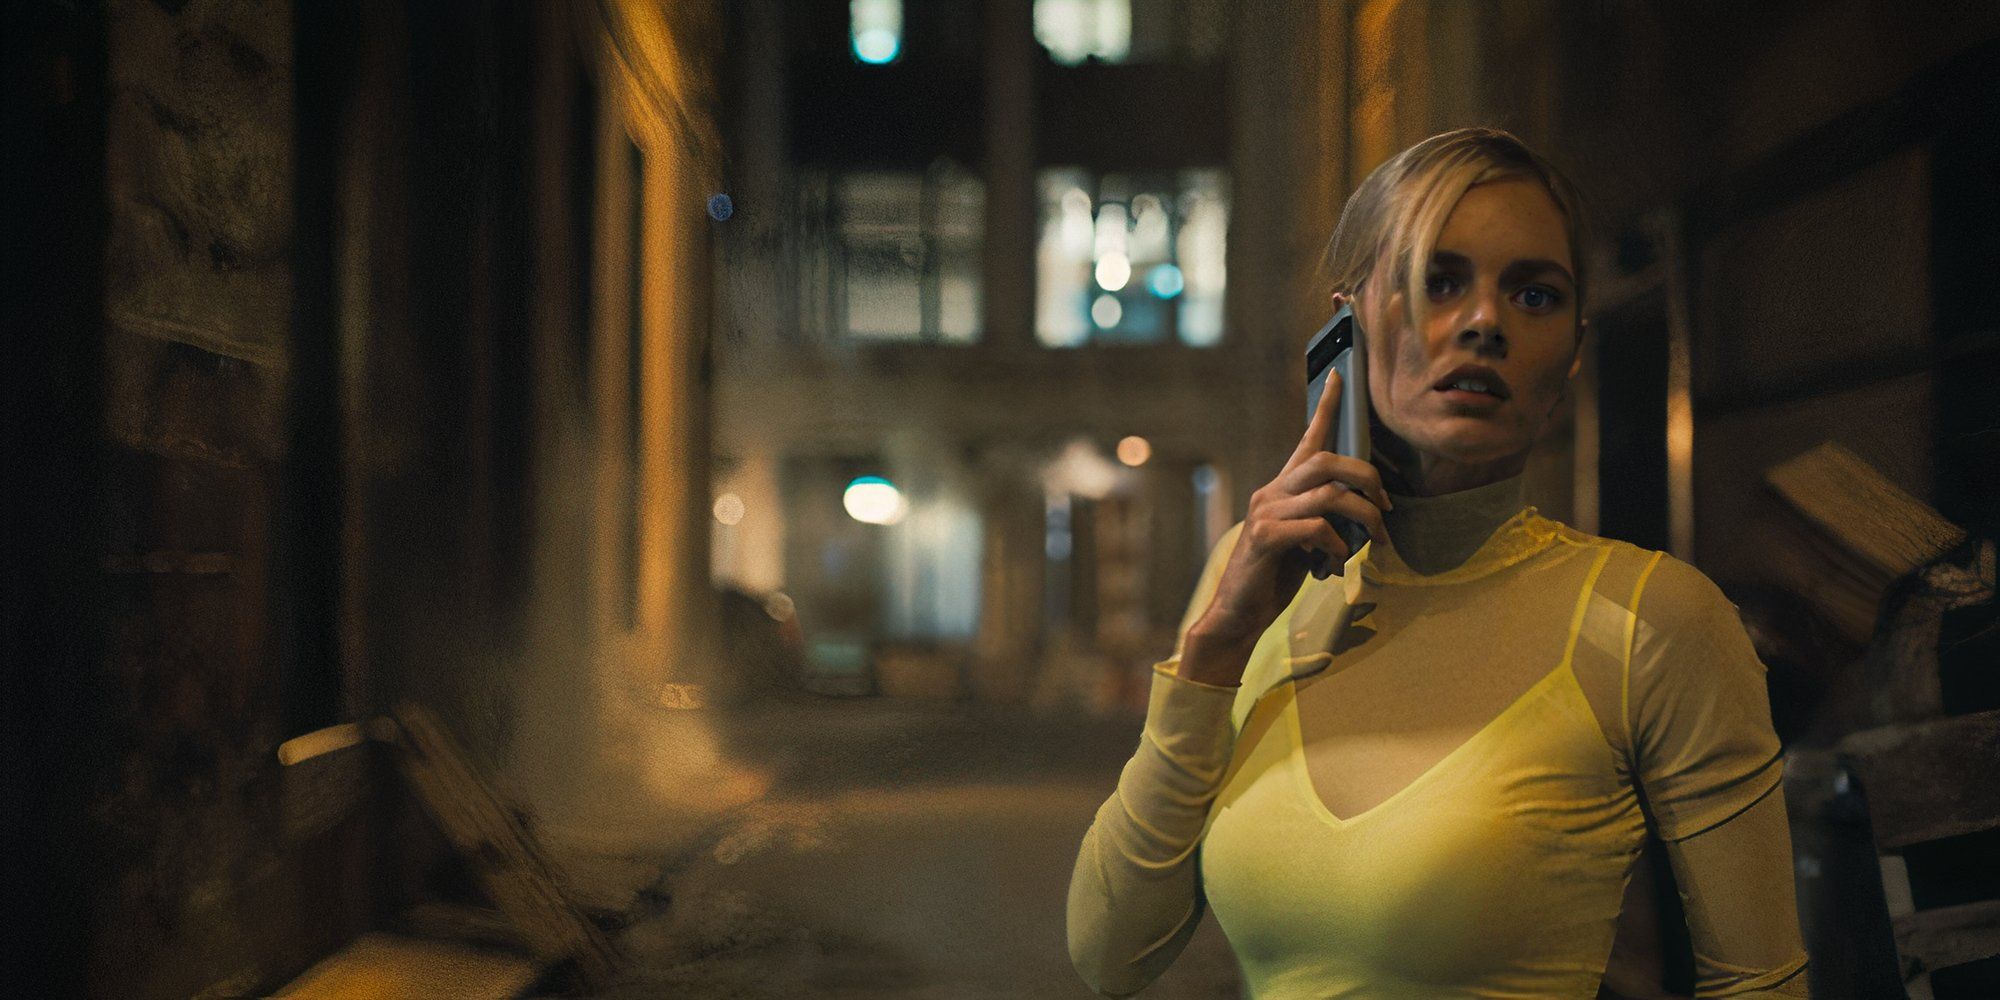 laura crane on the phone with ghostface in alleyway